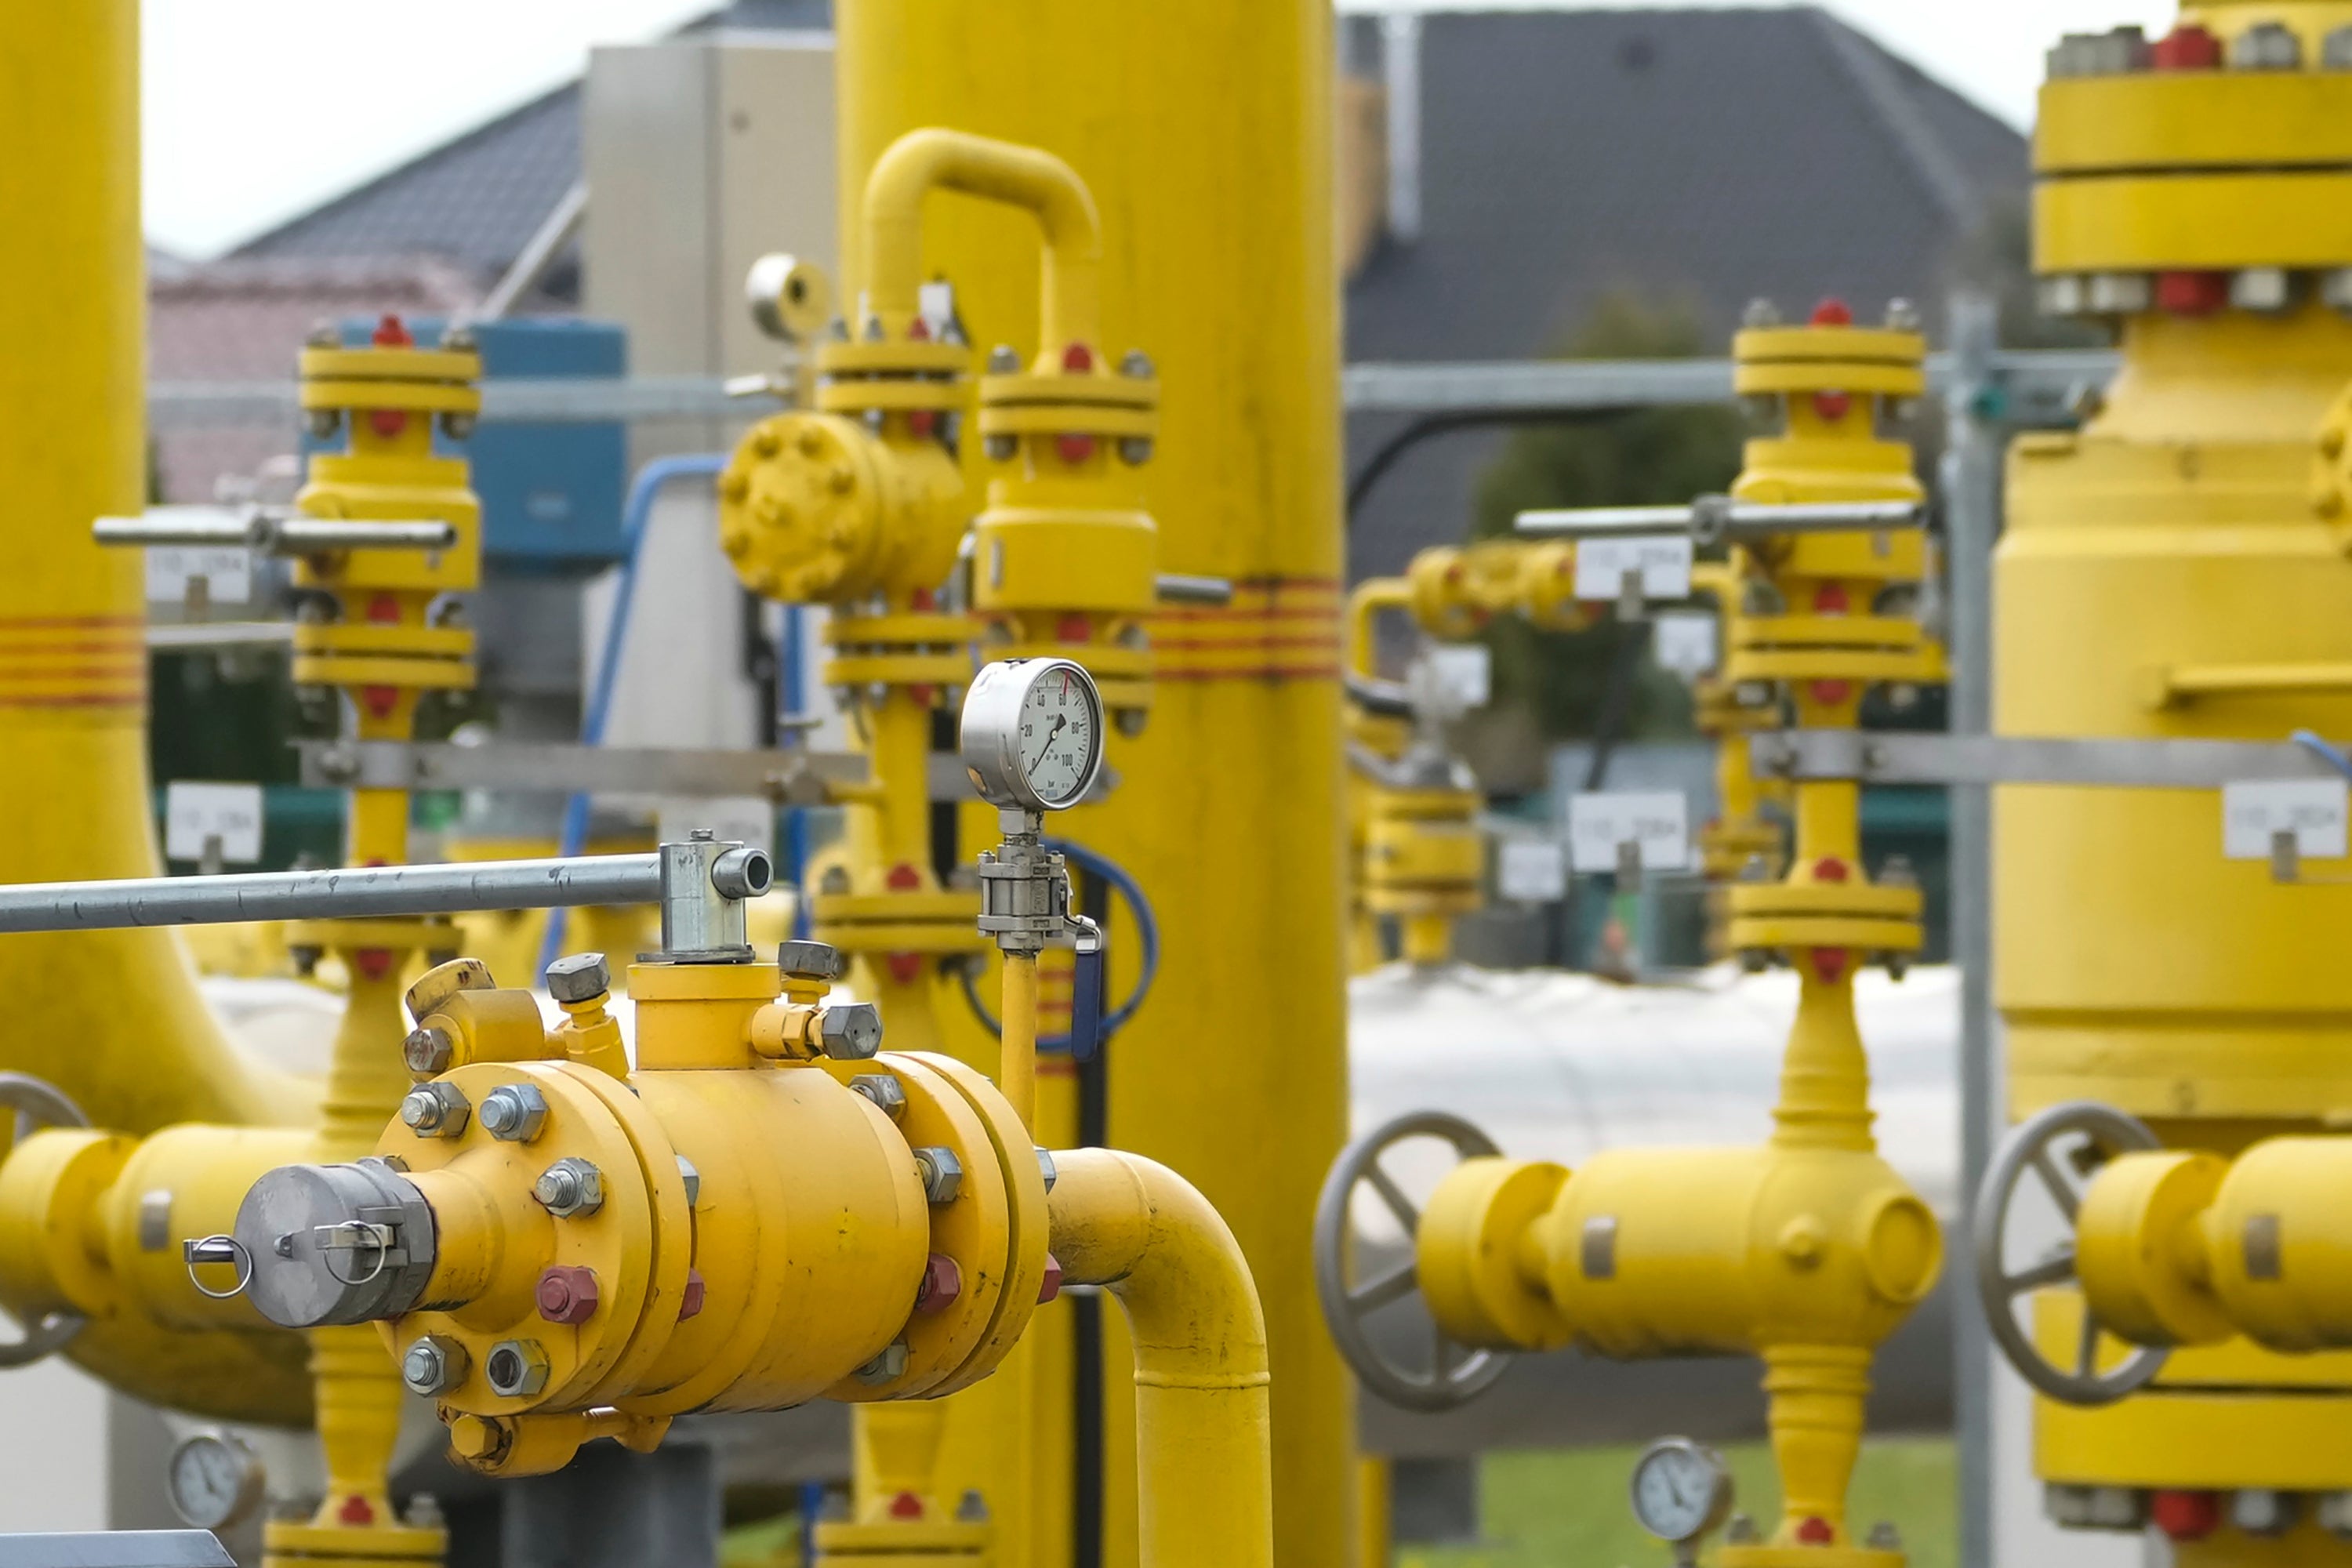 Ukraine said it will block some of the supply of Russian gas to Europe